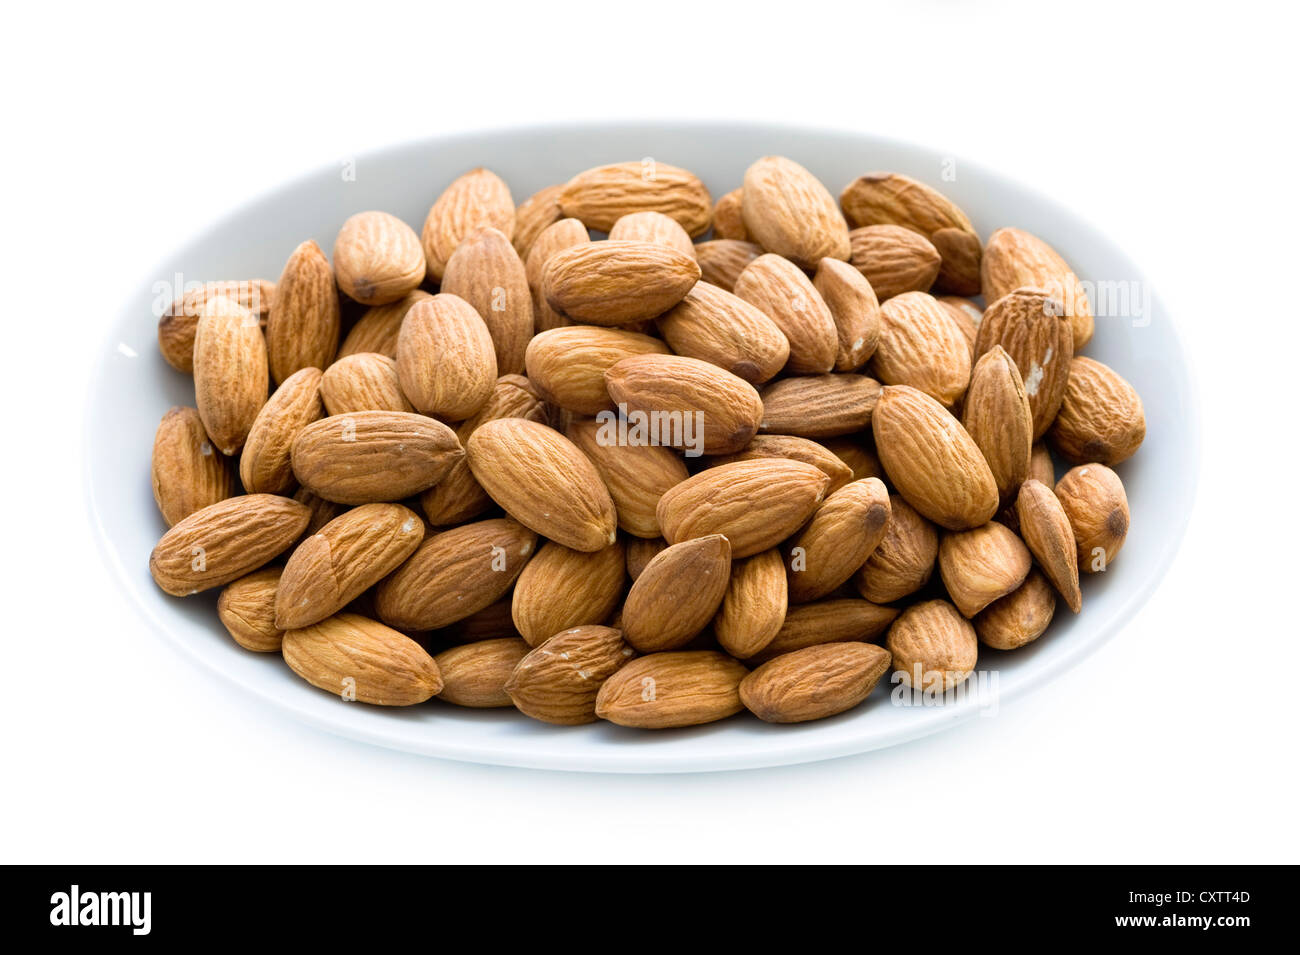 whole shelled almond nuts or almonds in a dish, bowl or plate isolated on a white background cutout Stock Photo